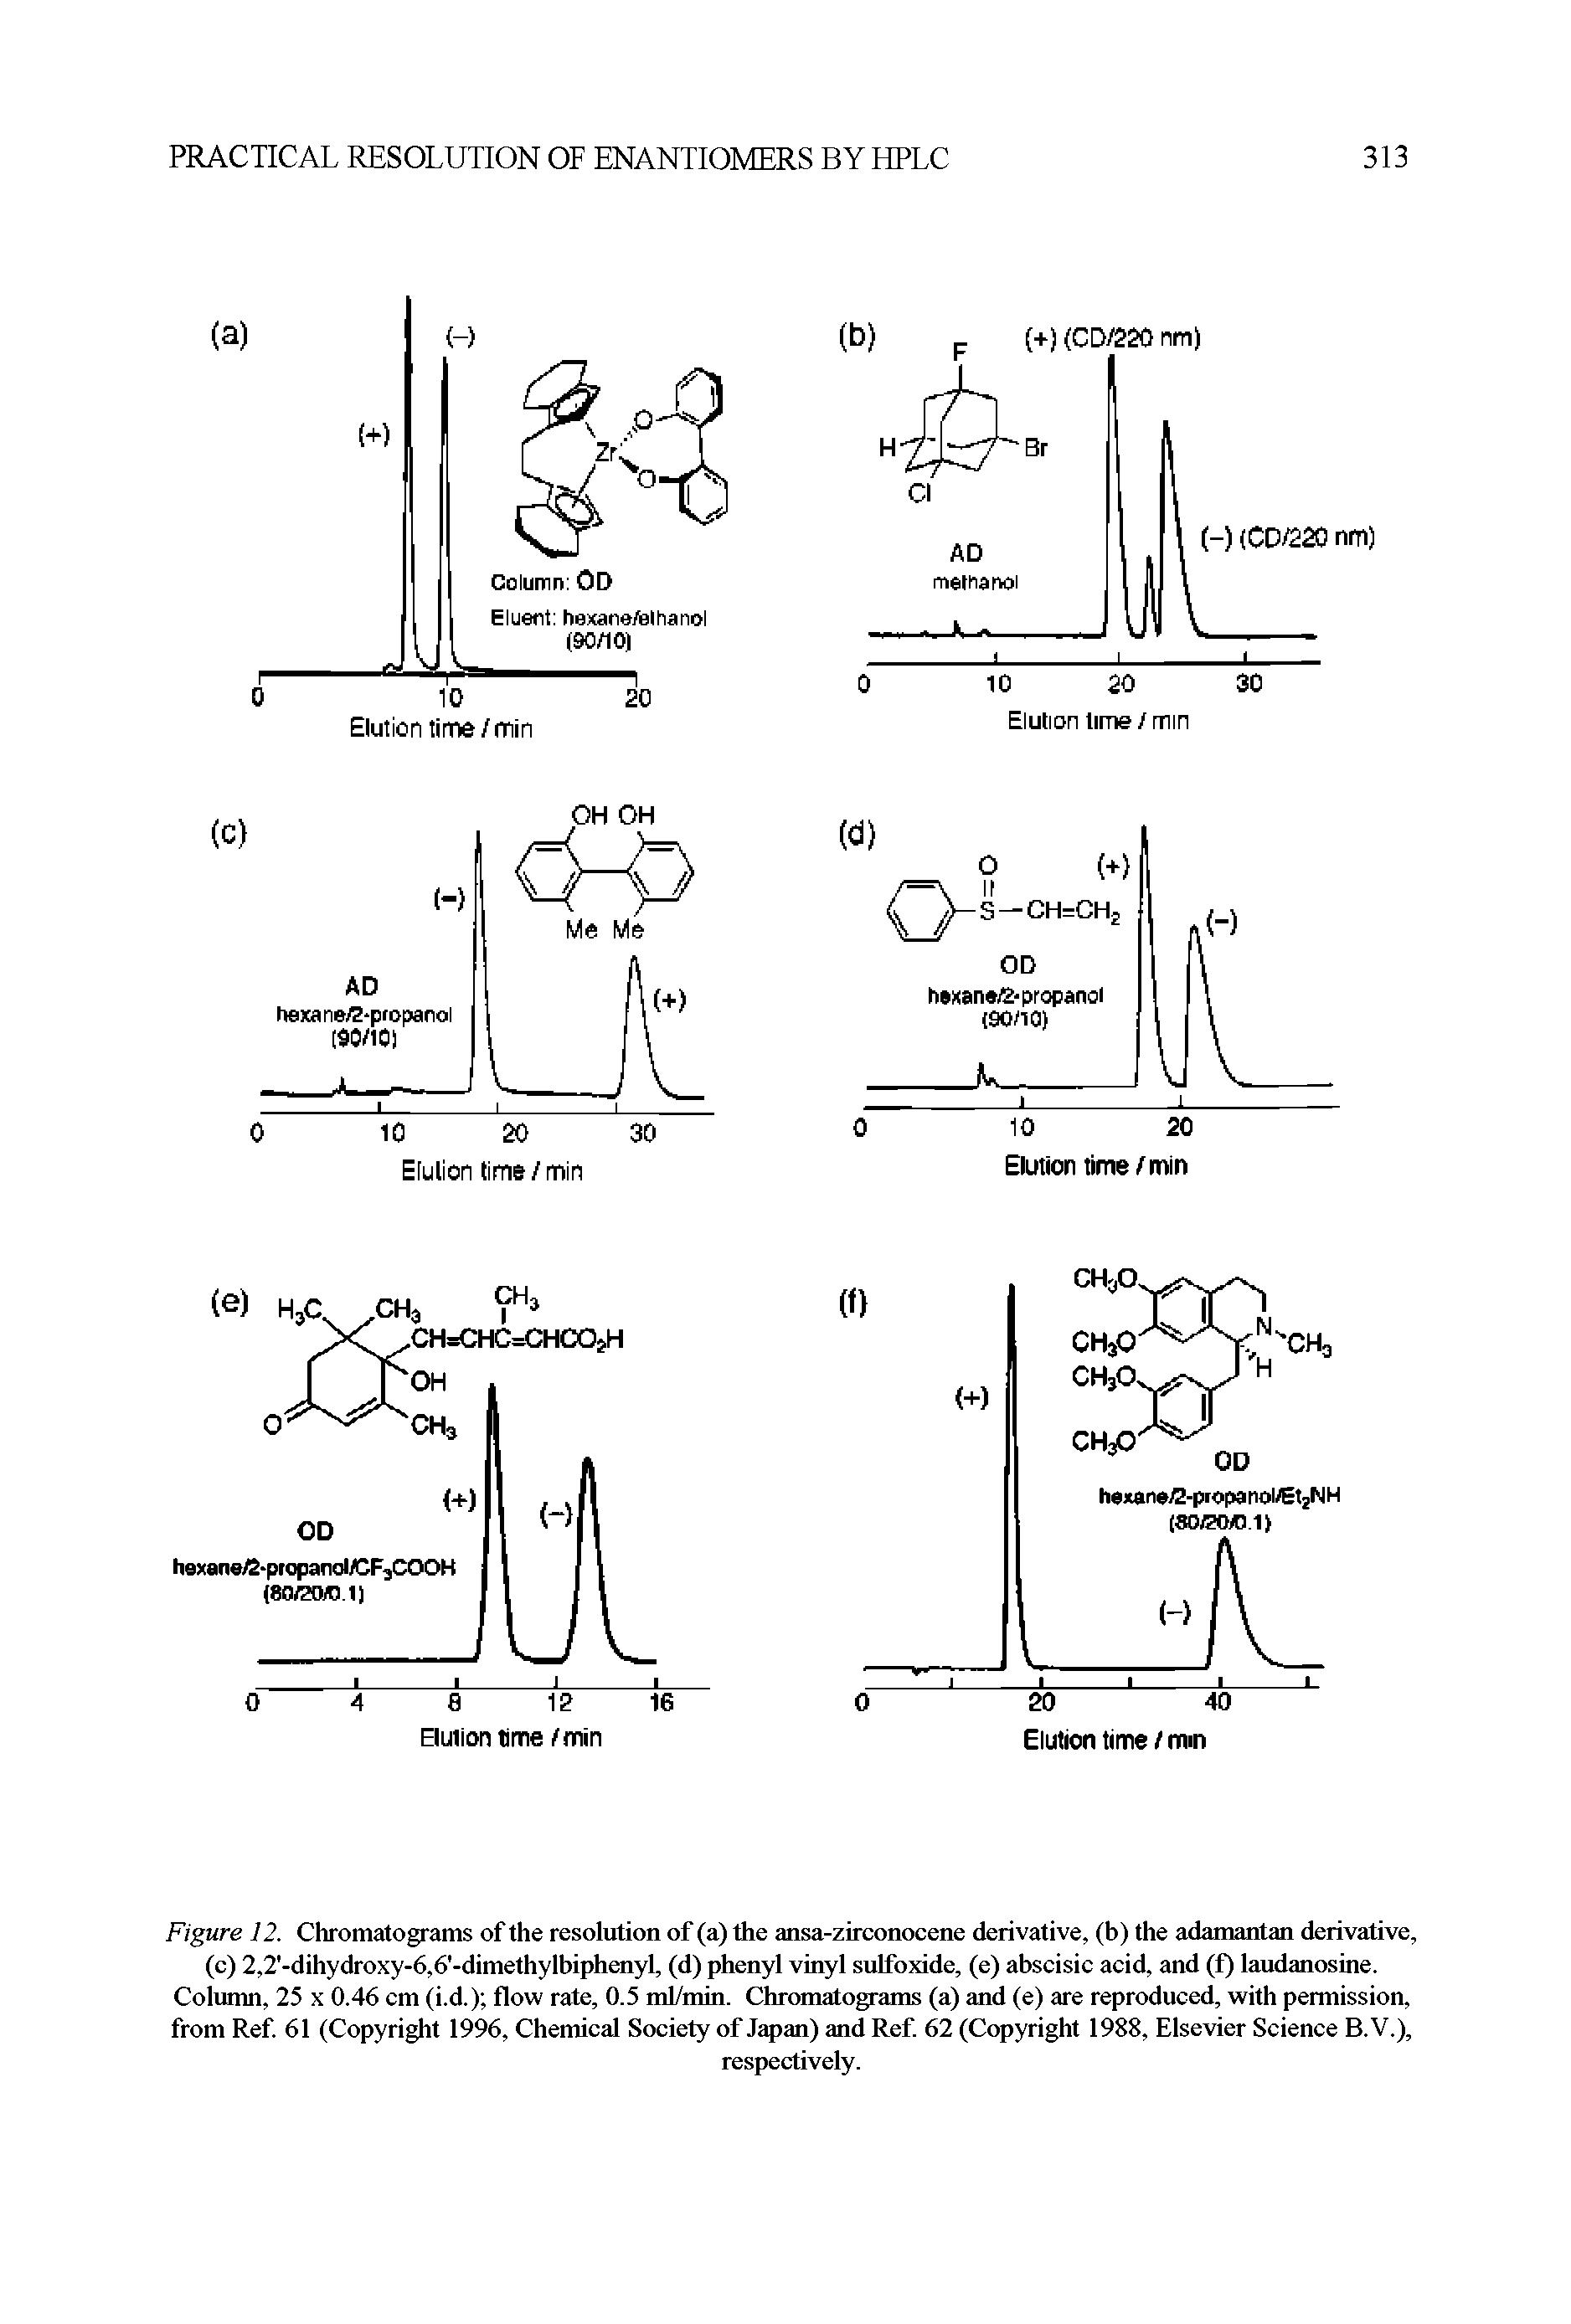 Figure 12. Chromatograms of the resolution of (a) the ansa-zirconocene derivative, (b) the adamantan derivative, (c) 2,2 -dihydroxy-6,6 -dimethylbiphenyl, (d) phenyl vinyl sulfoxide, (e) abscisic acid, and (f) laudanosine. Column, 25 x 0.46 cm (i.d.) flow rate, 0.5 ml/min. Chromatograms (a) and (e) are reproduced, with permission, from Ref. 61 (Copyright 1996, Chemical Society of Japan) and Ref. 62 (Copyright 1988, Elsevier Science B.V.),...